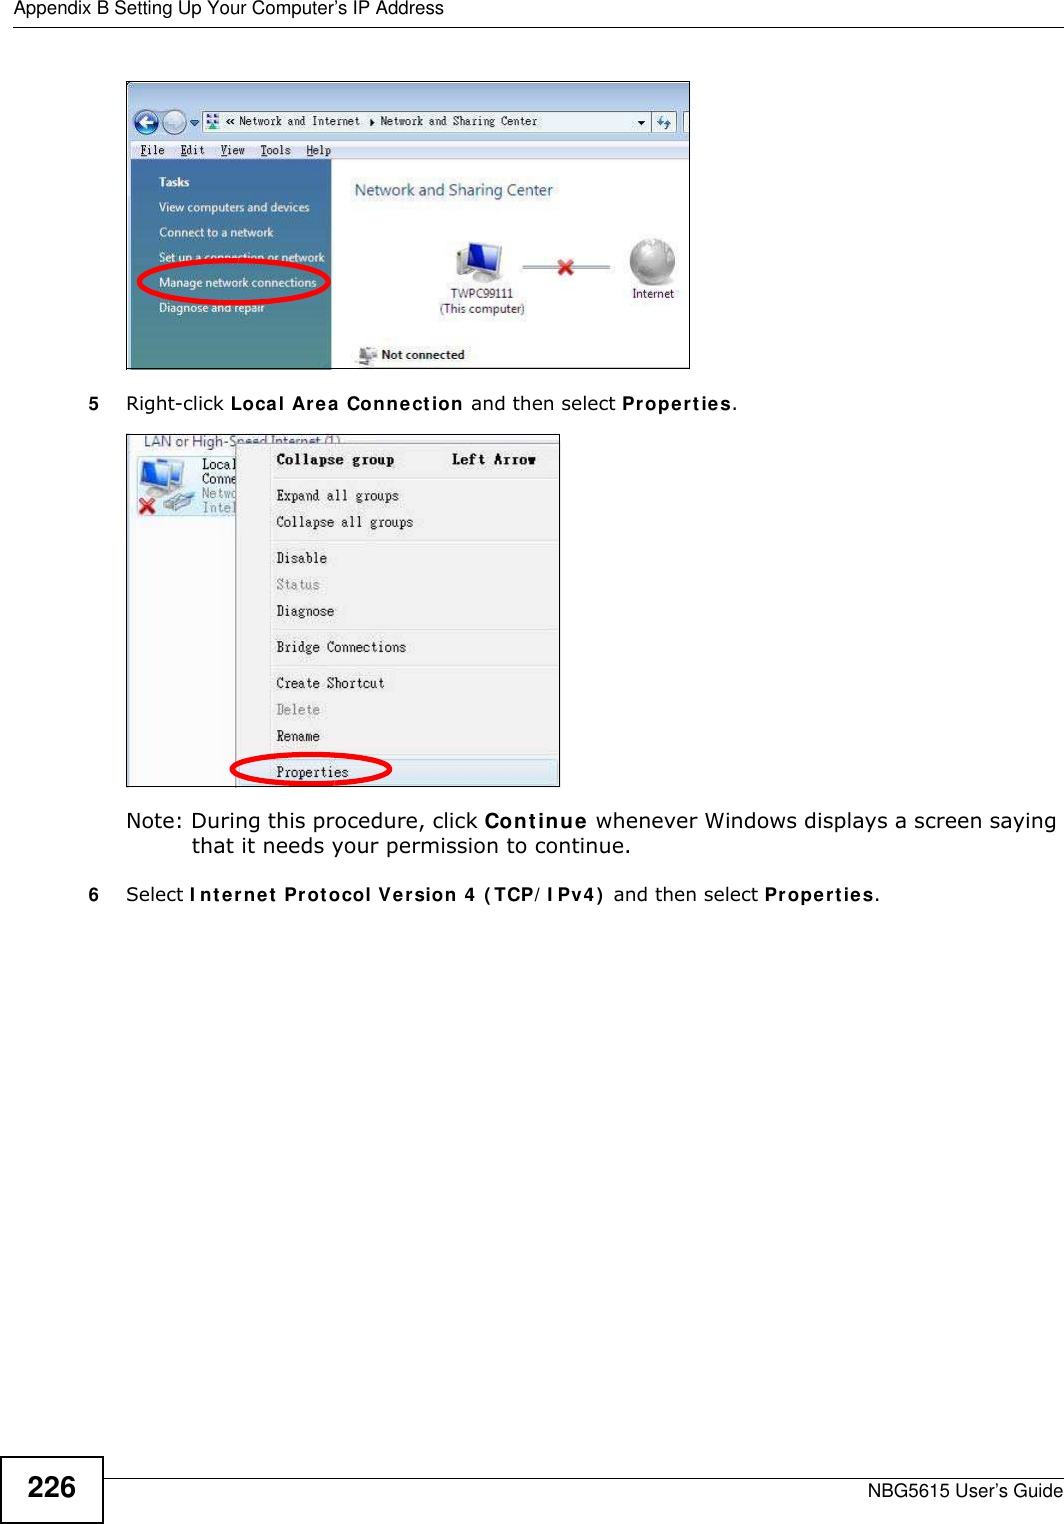 Appendix B Setting Up Your Computer’s IP AddressNBG5615 User’s Guide2265Right-click Local Area Connection and then select Properties.Note: During this procedure, click Continue whenever Windows displays a screen saying that it needs your permission to continue.6Select I nternet Protocol Version 4 ( TCP/ I Pv4)  and then select Properties.